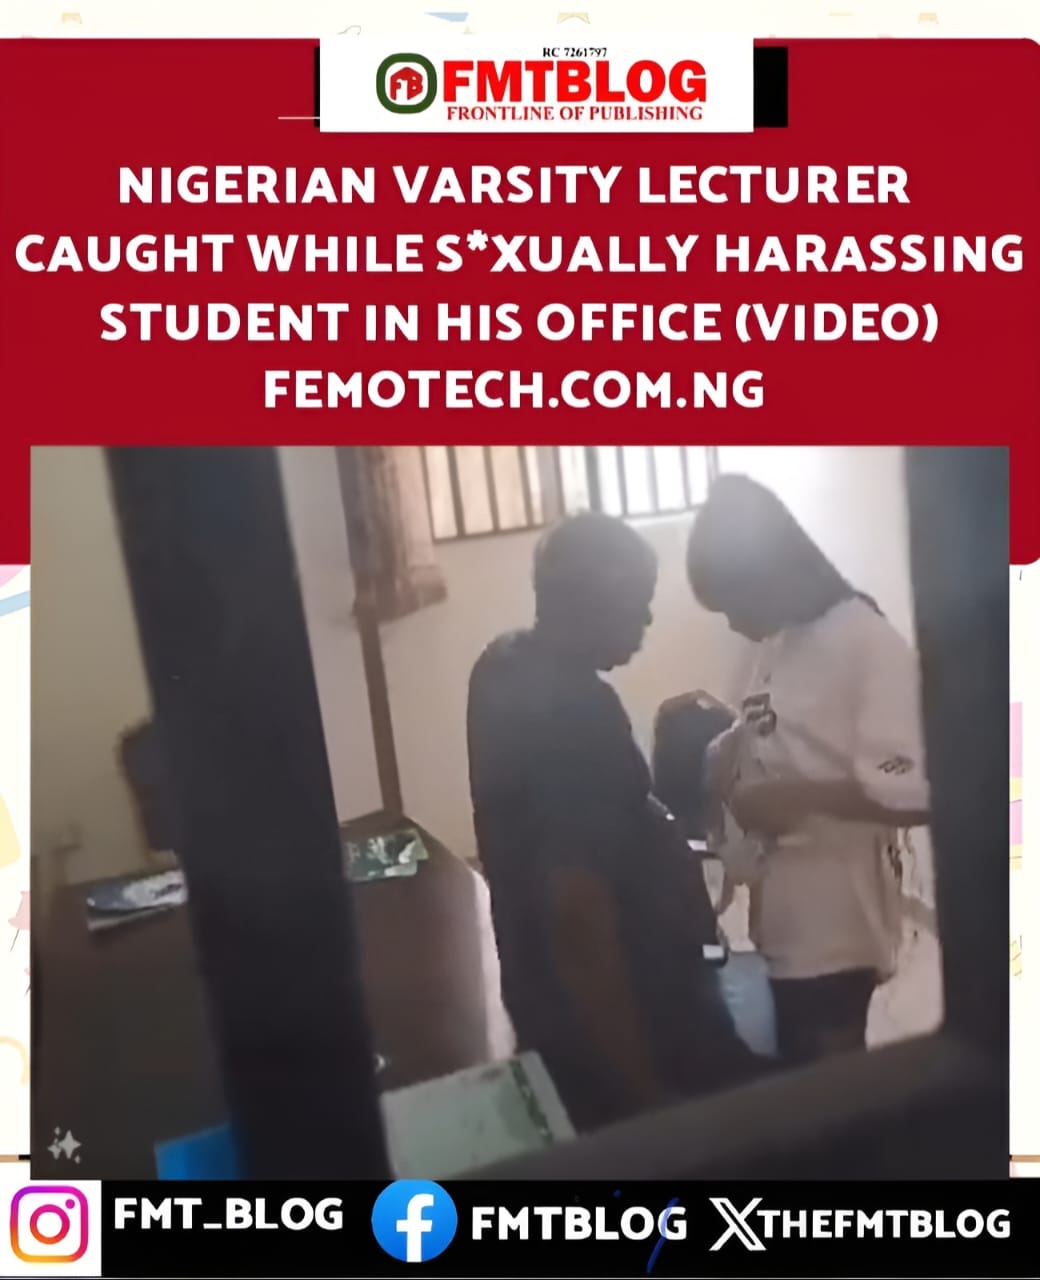 Nigerian Varsity Lecturer Caught While S*xually Harassing Student In His Office (VIDEO)